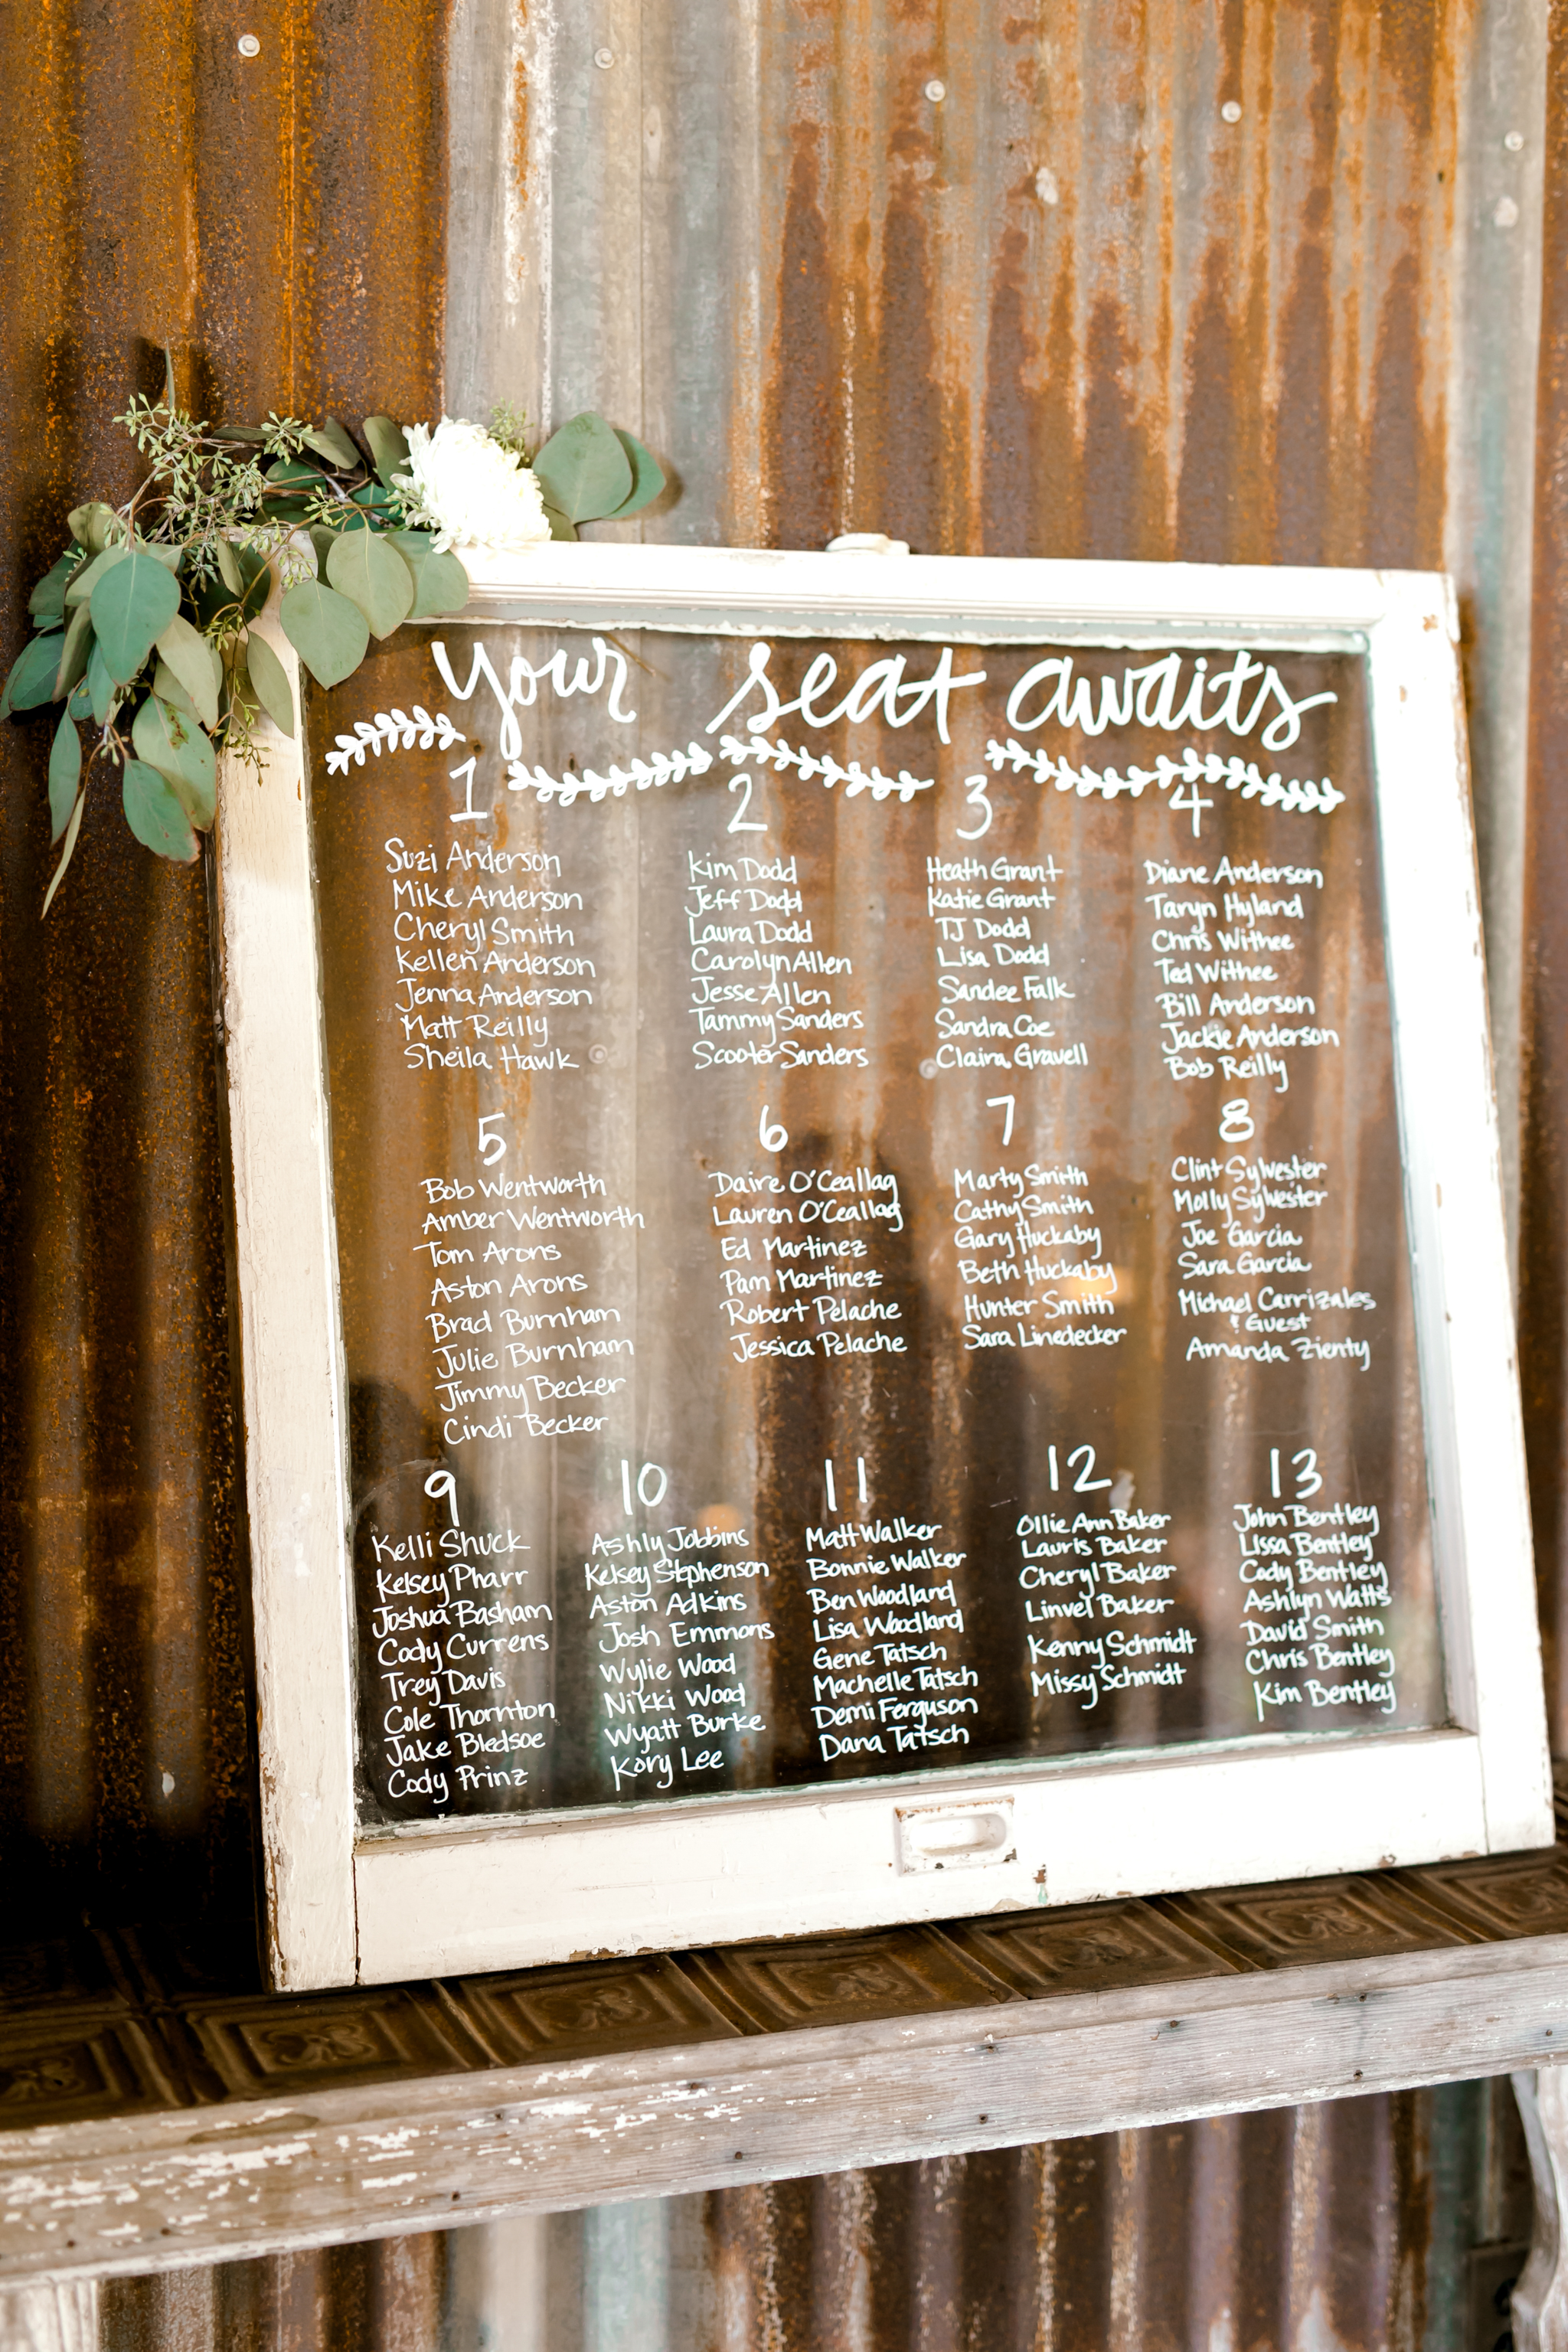  Petal Pushers is a premier wedding &amp; special event florist located just outside of Austin in Dripping Springs, Texas. Hill Country wedding venue, The Creek Haus, seat assignment wedding inspiration. 